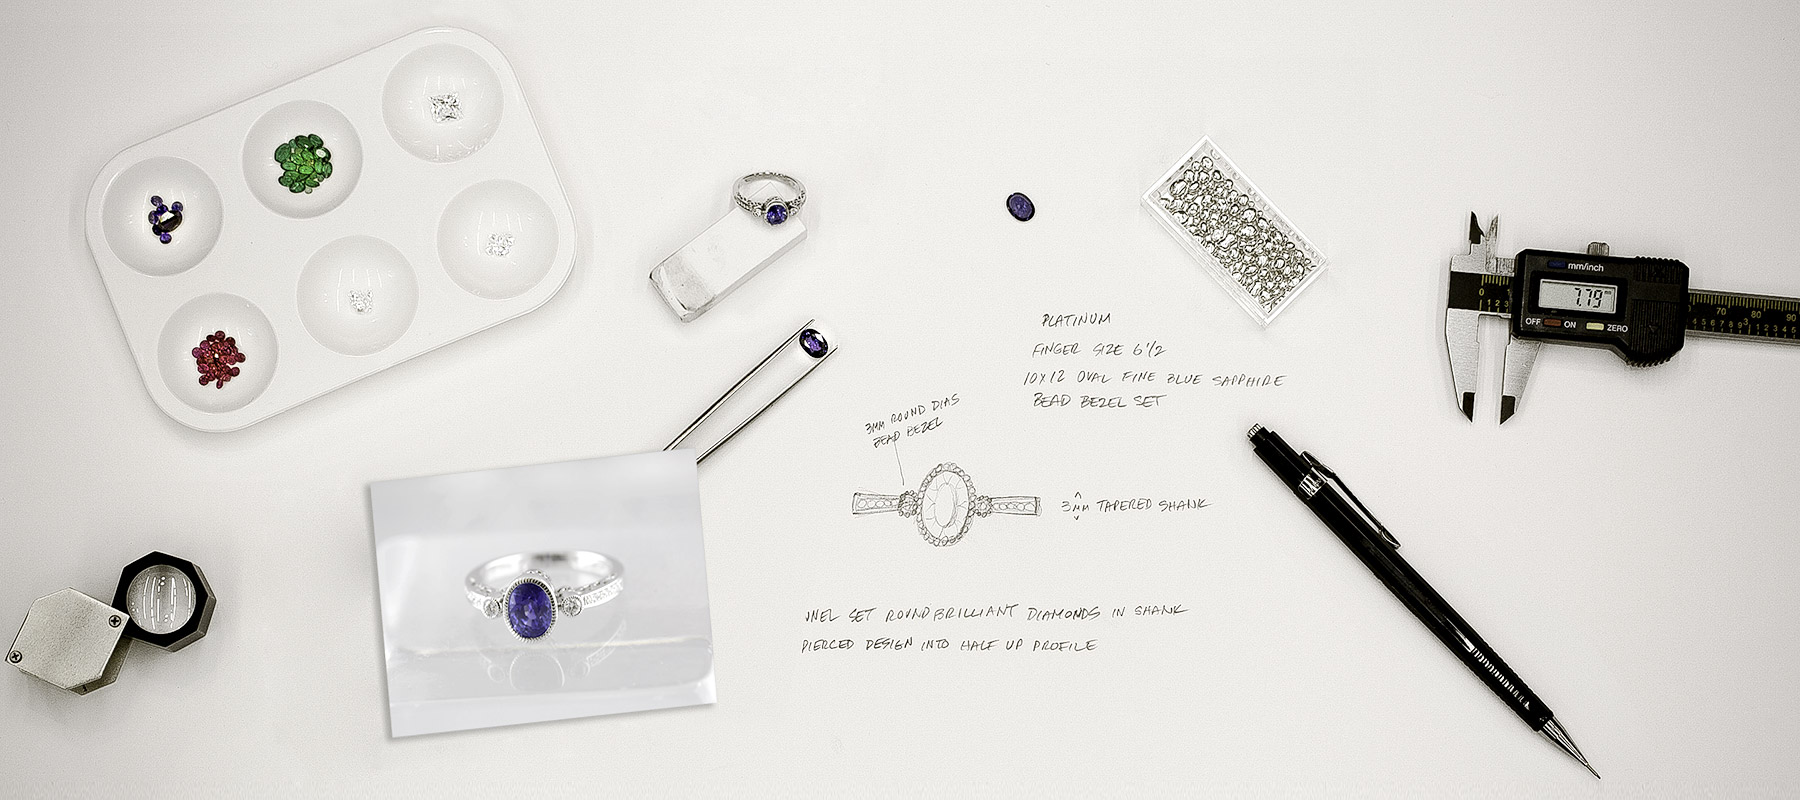 The jewelry designer table with tools and sketches